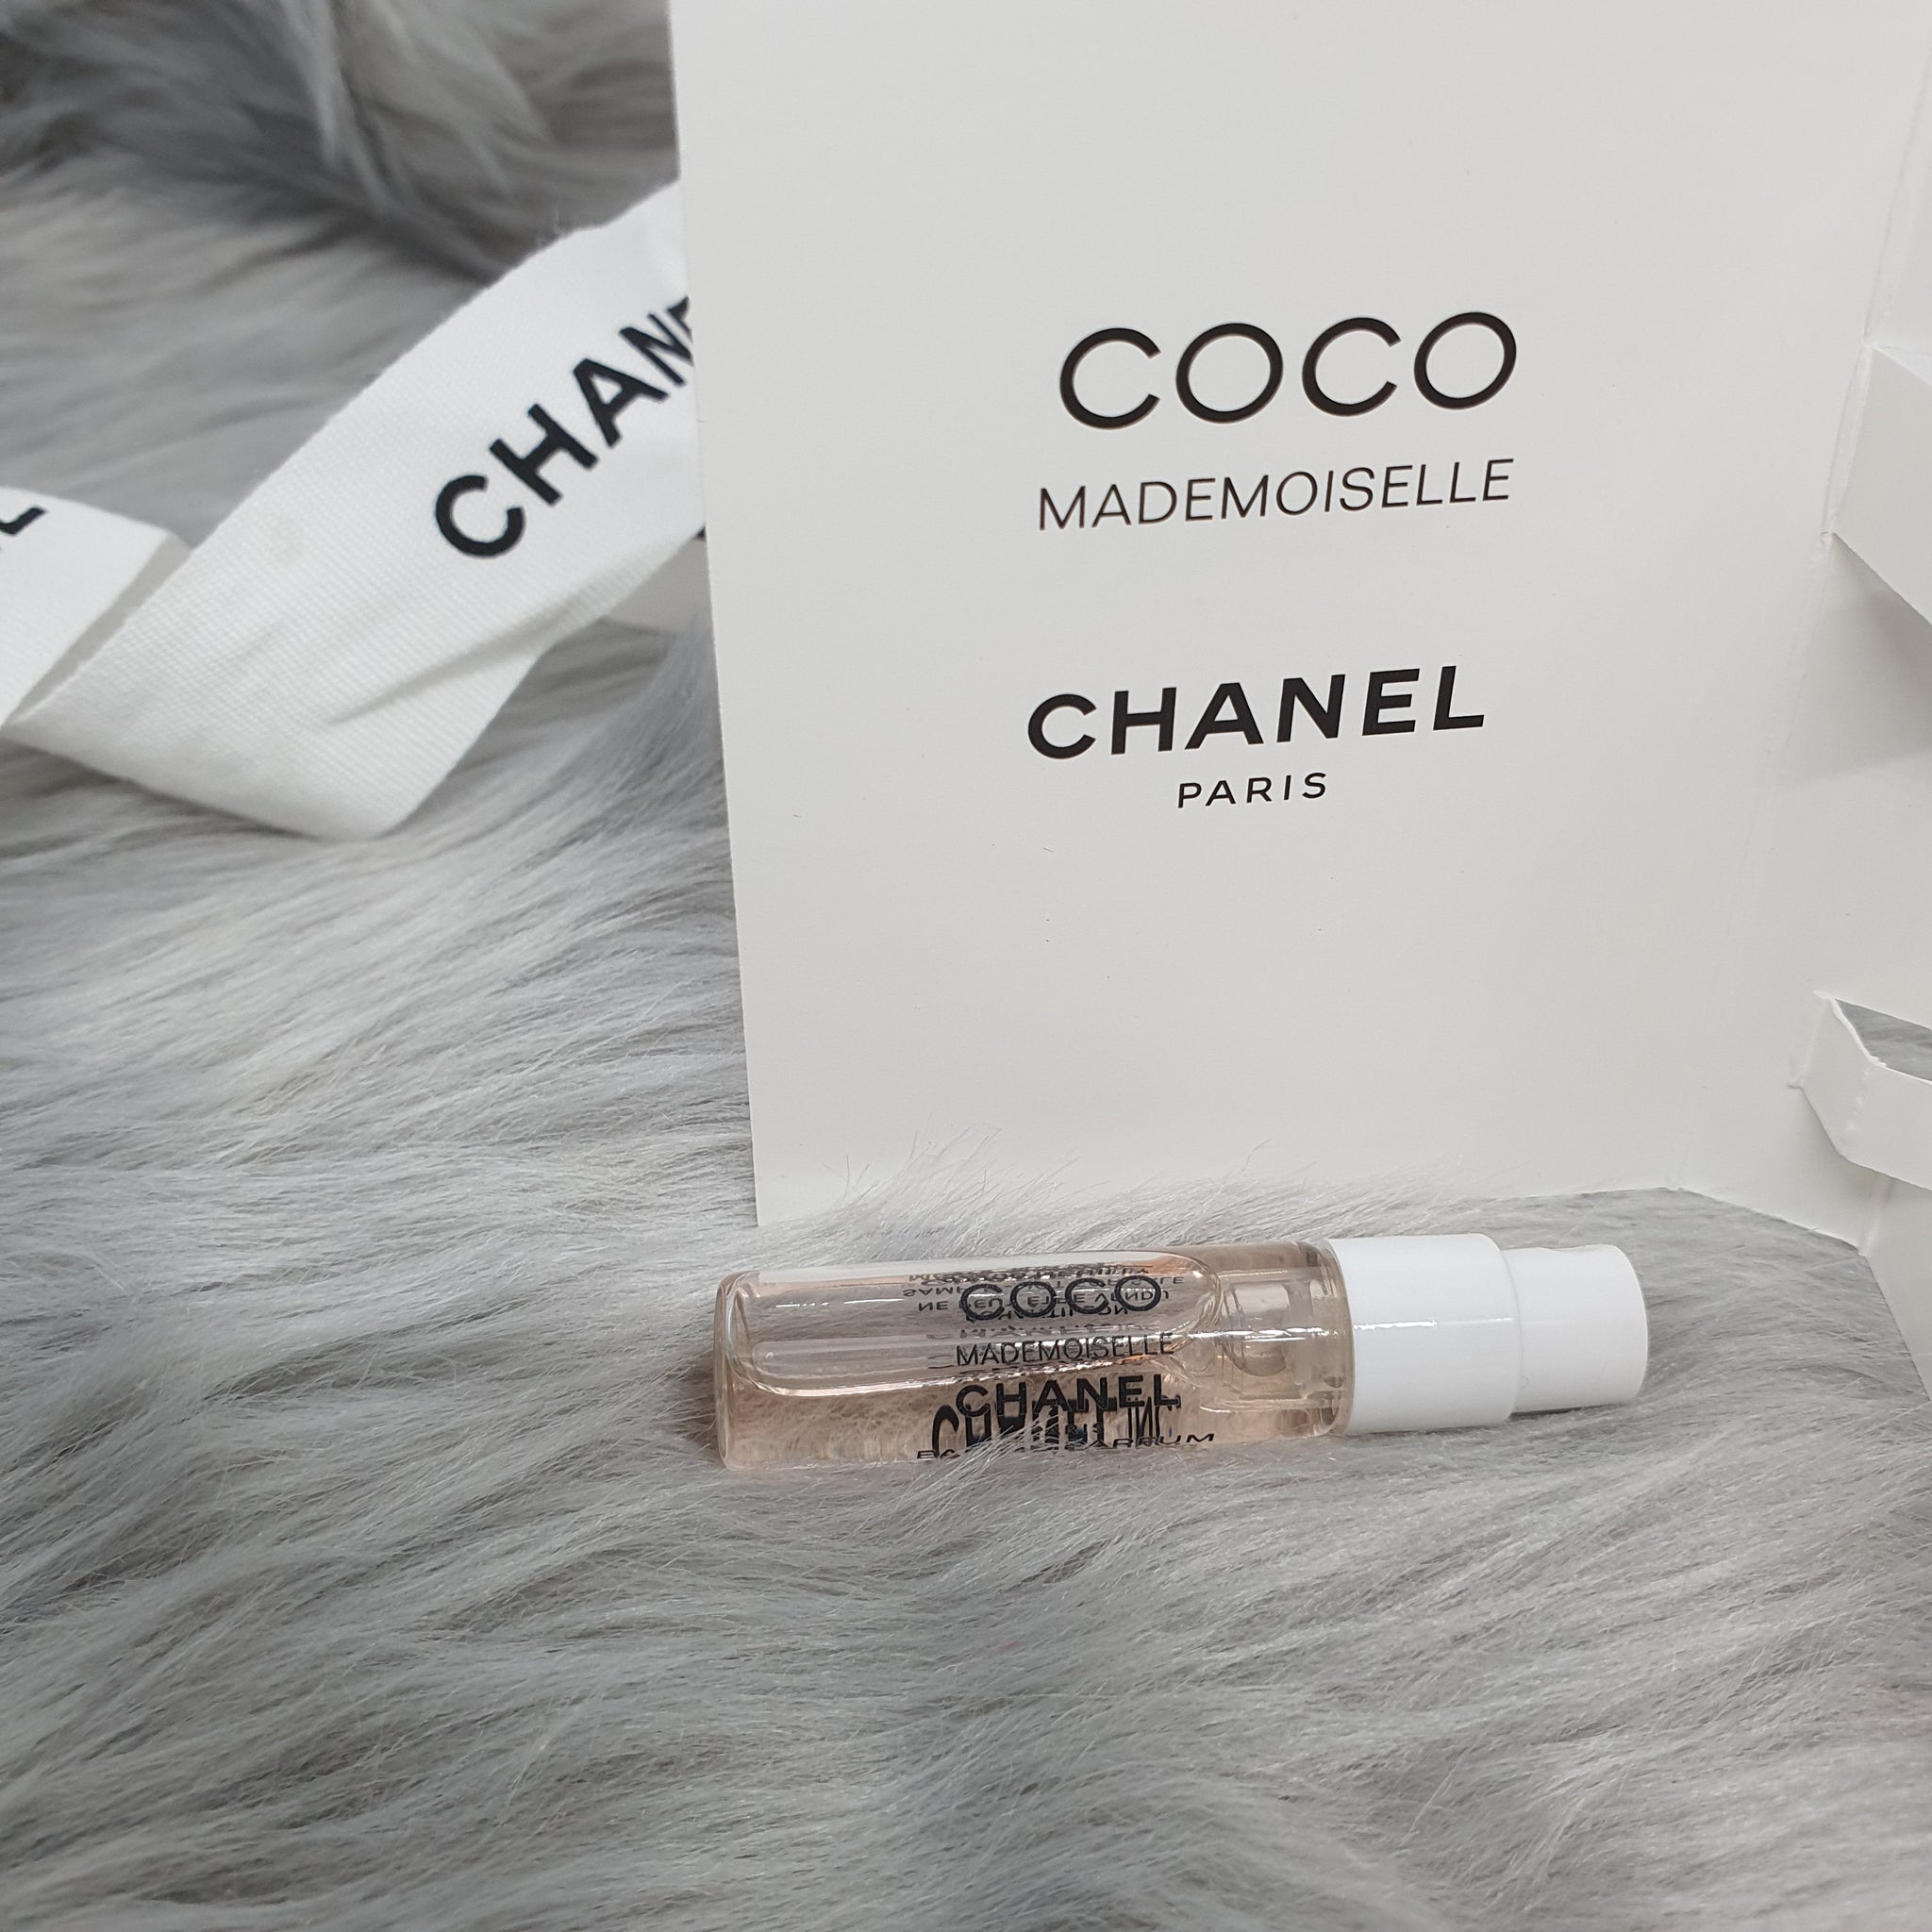 Chanel Coco Mademoiselle Vial 1.5 ML – The Glam Zone PH